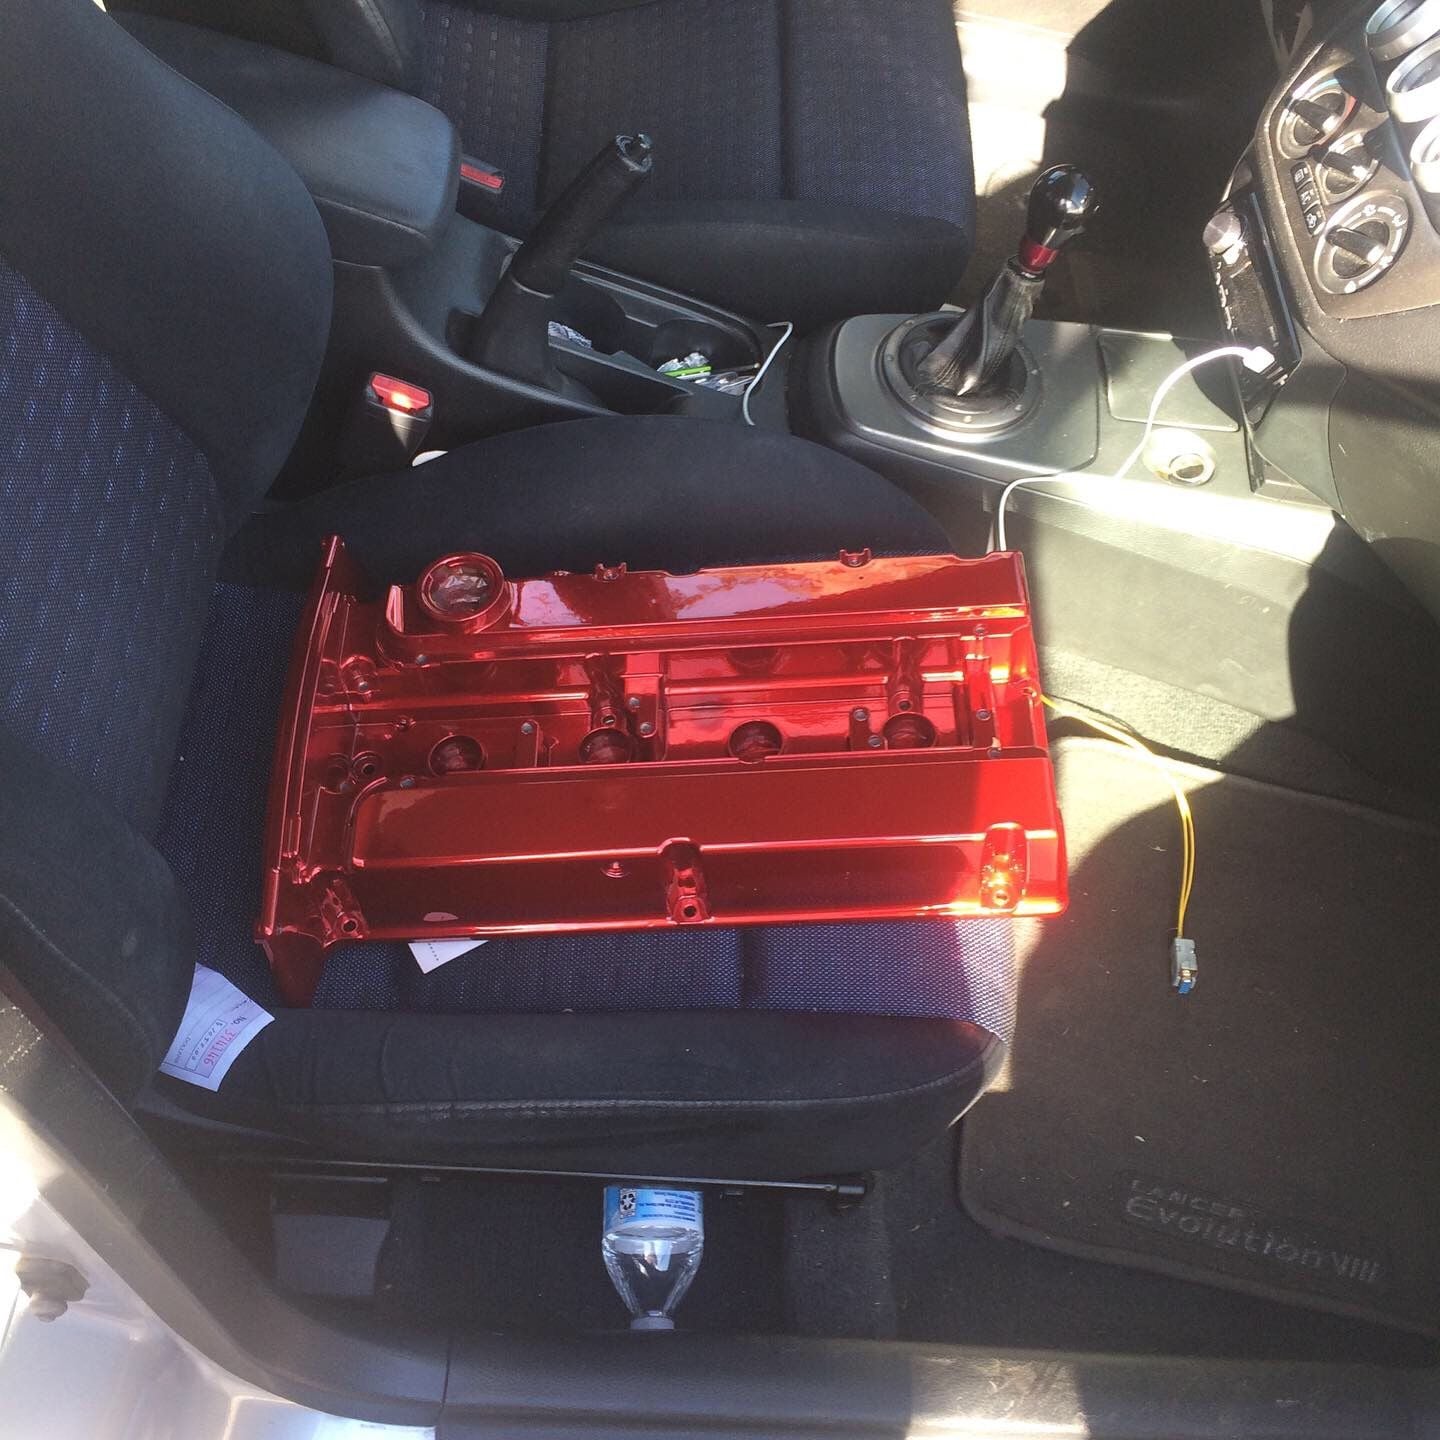 Engine - Power Adders - Powdercoated lollipop red Evo 8 valve cover - Used - 2003 to 2005 Mitsubishi Lancer Evolution - Vancouver, WA 98661, United States